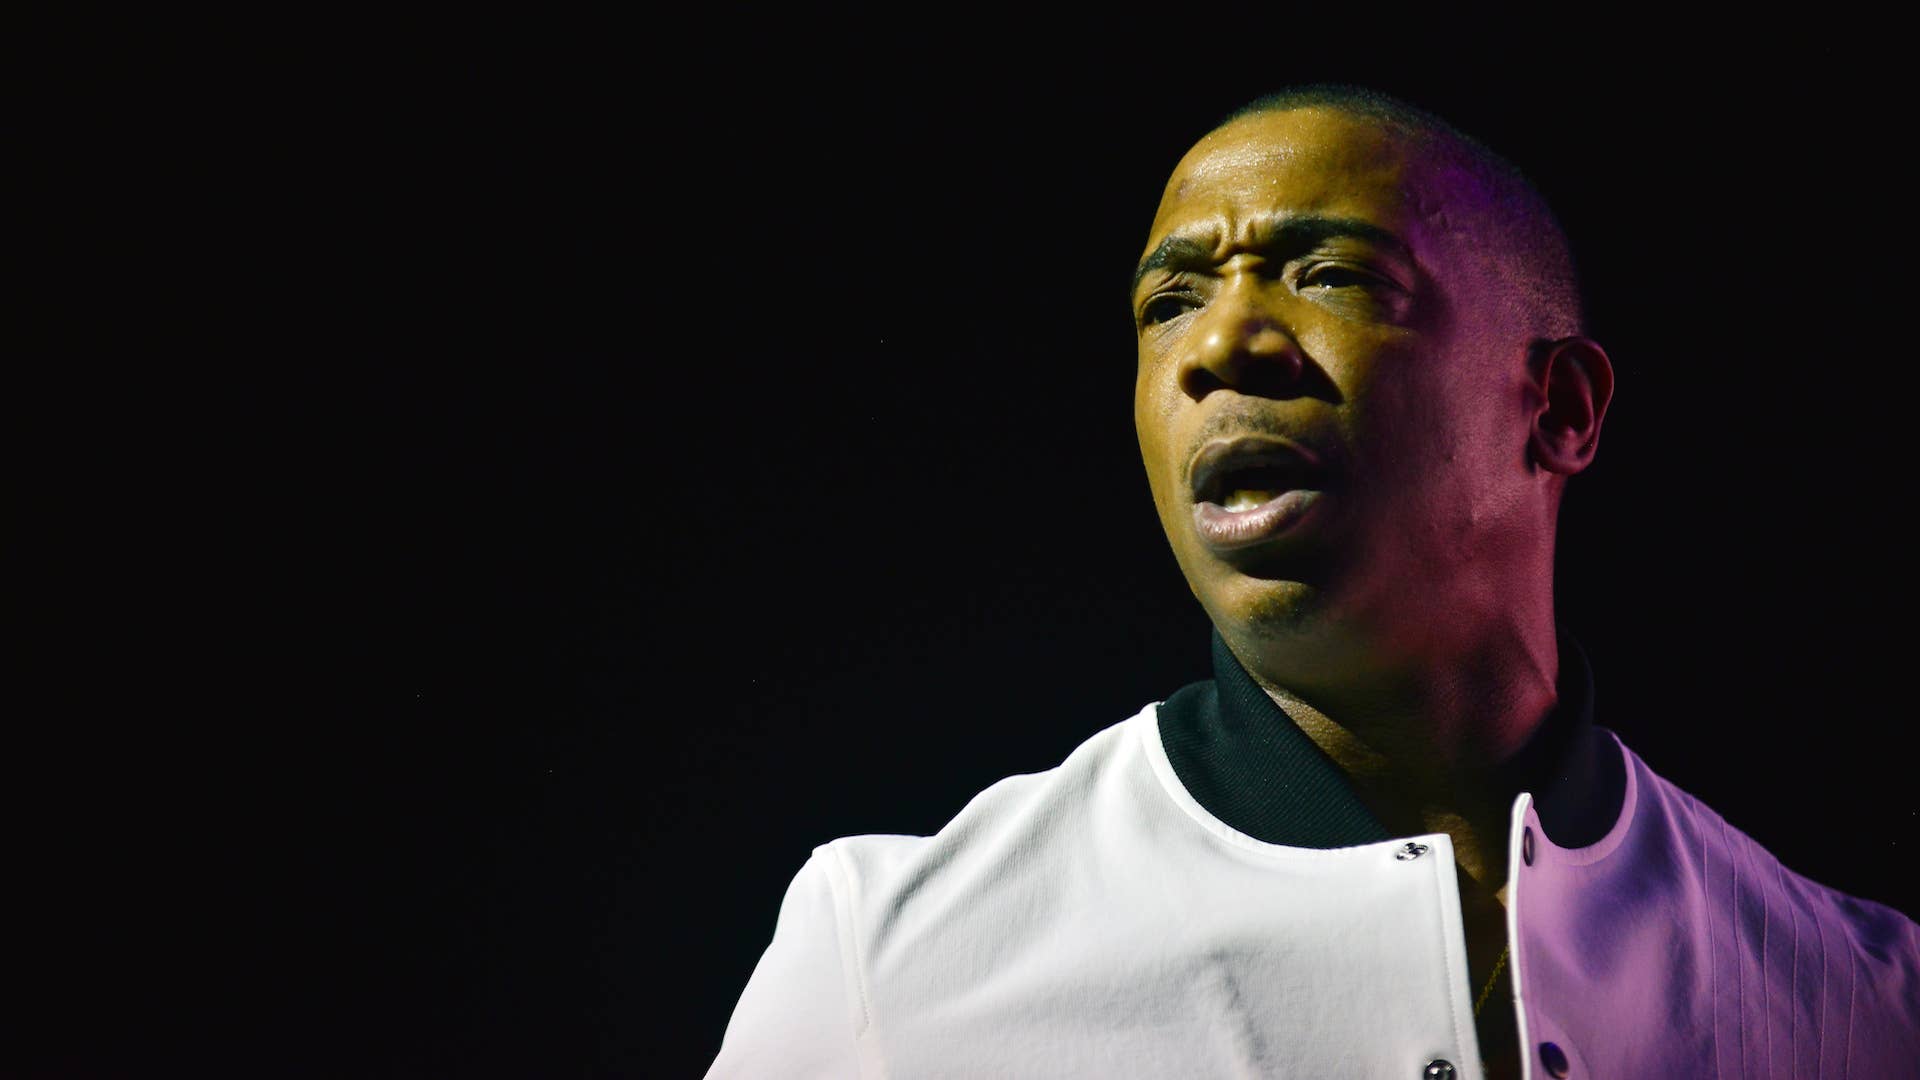 Ja Rule performs onstage at James L Knight Center.